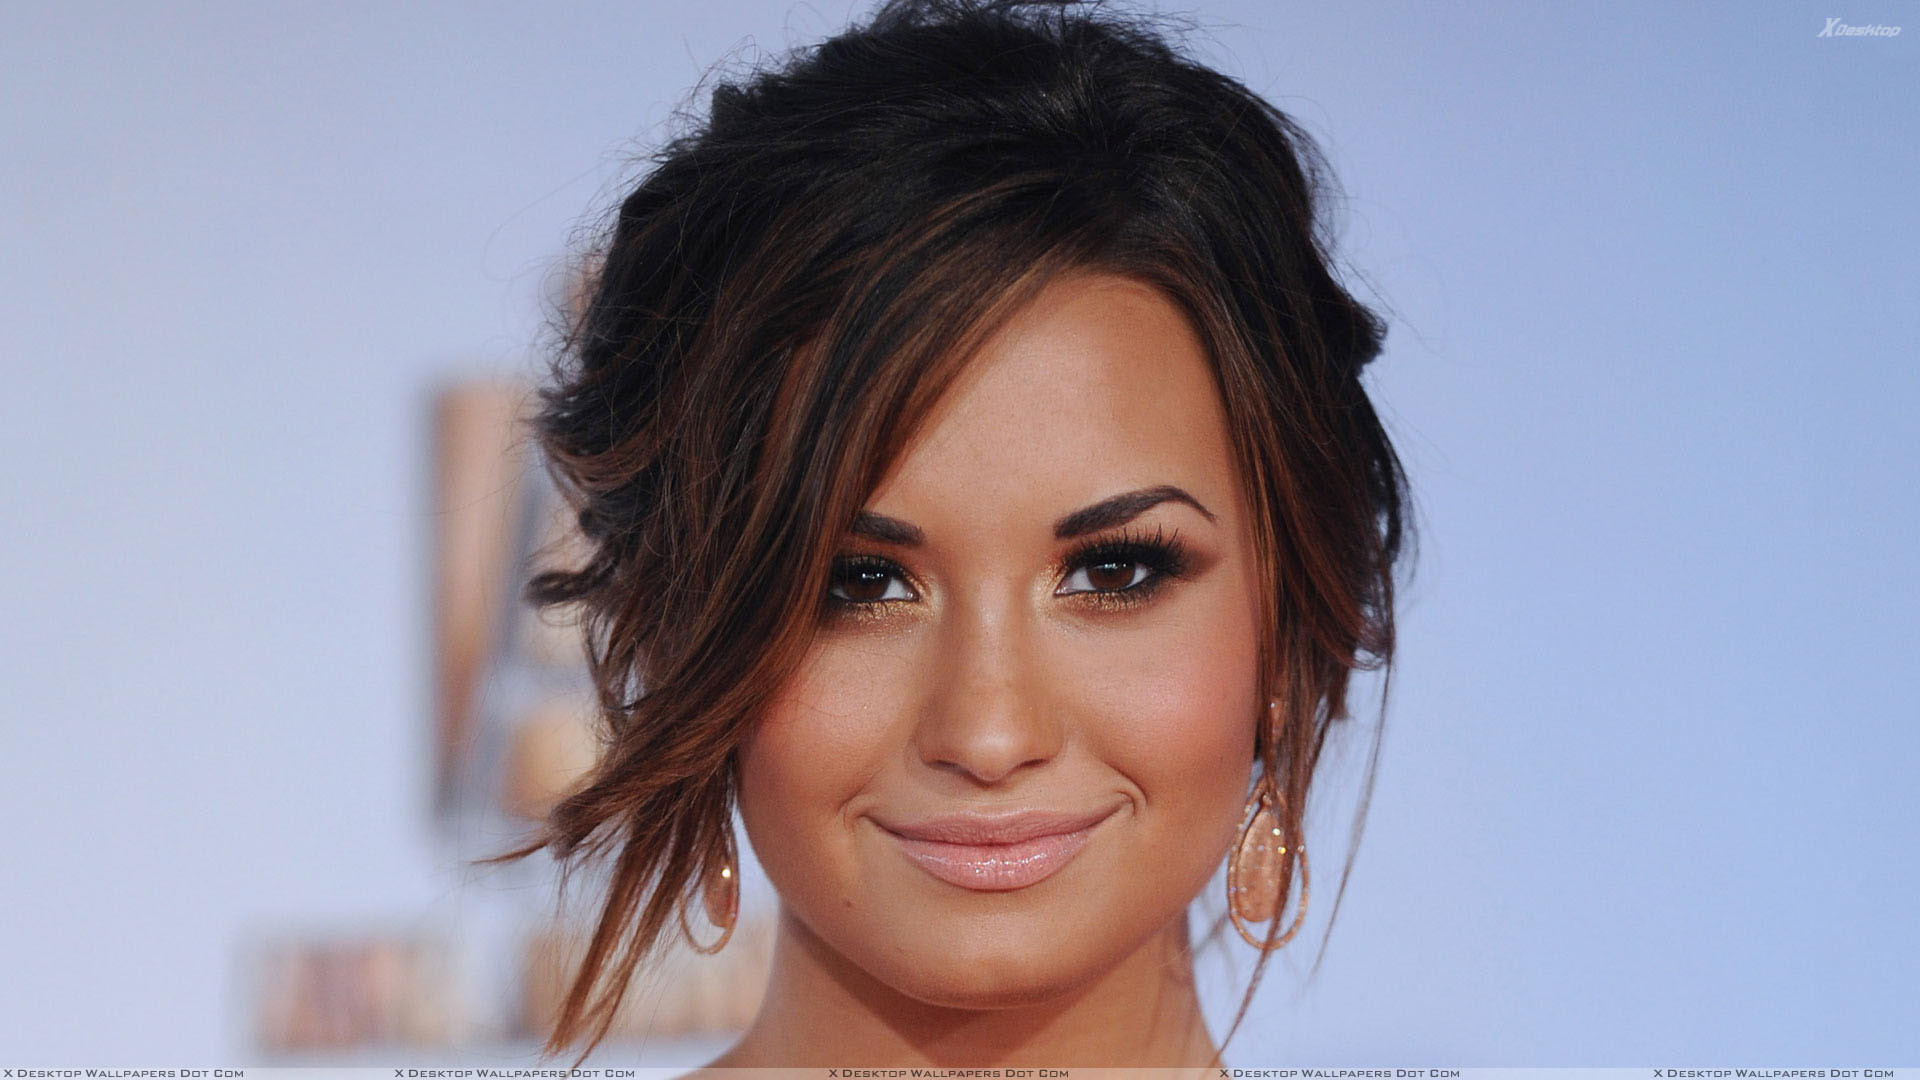 1920x1080 You are viewing wallpaper titled "Demi Lovato ...